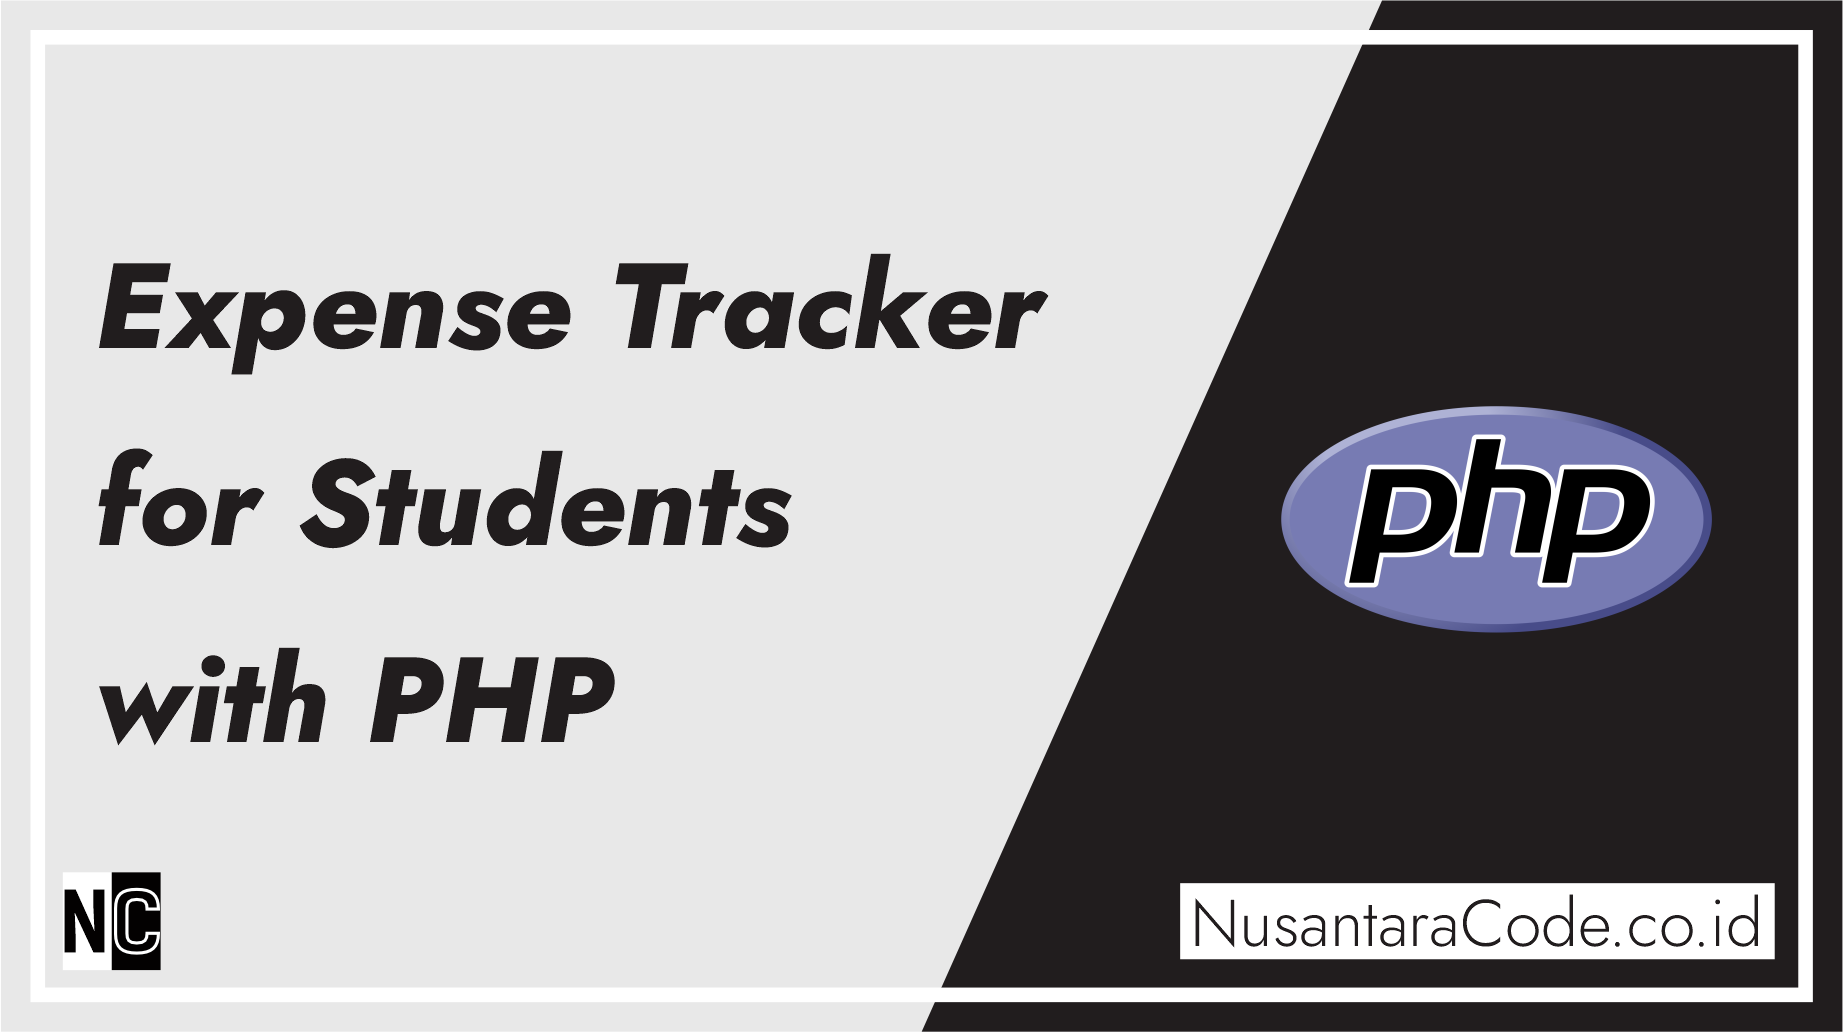 Expense Tracker for Students with PHP